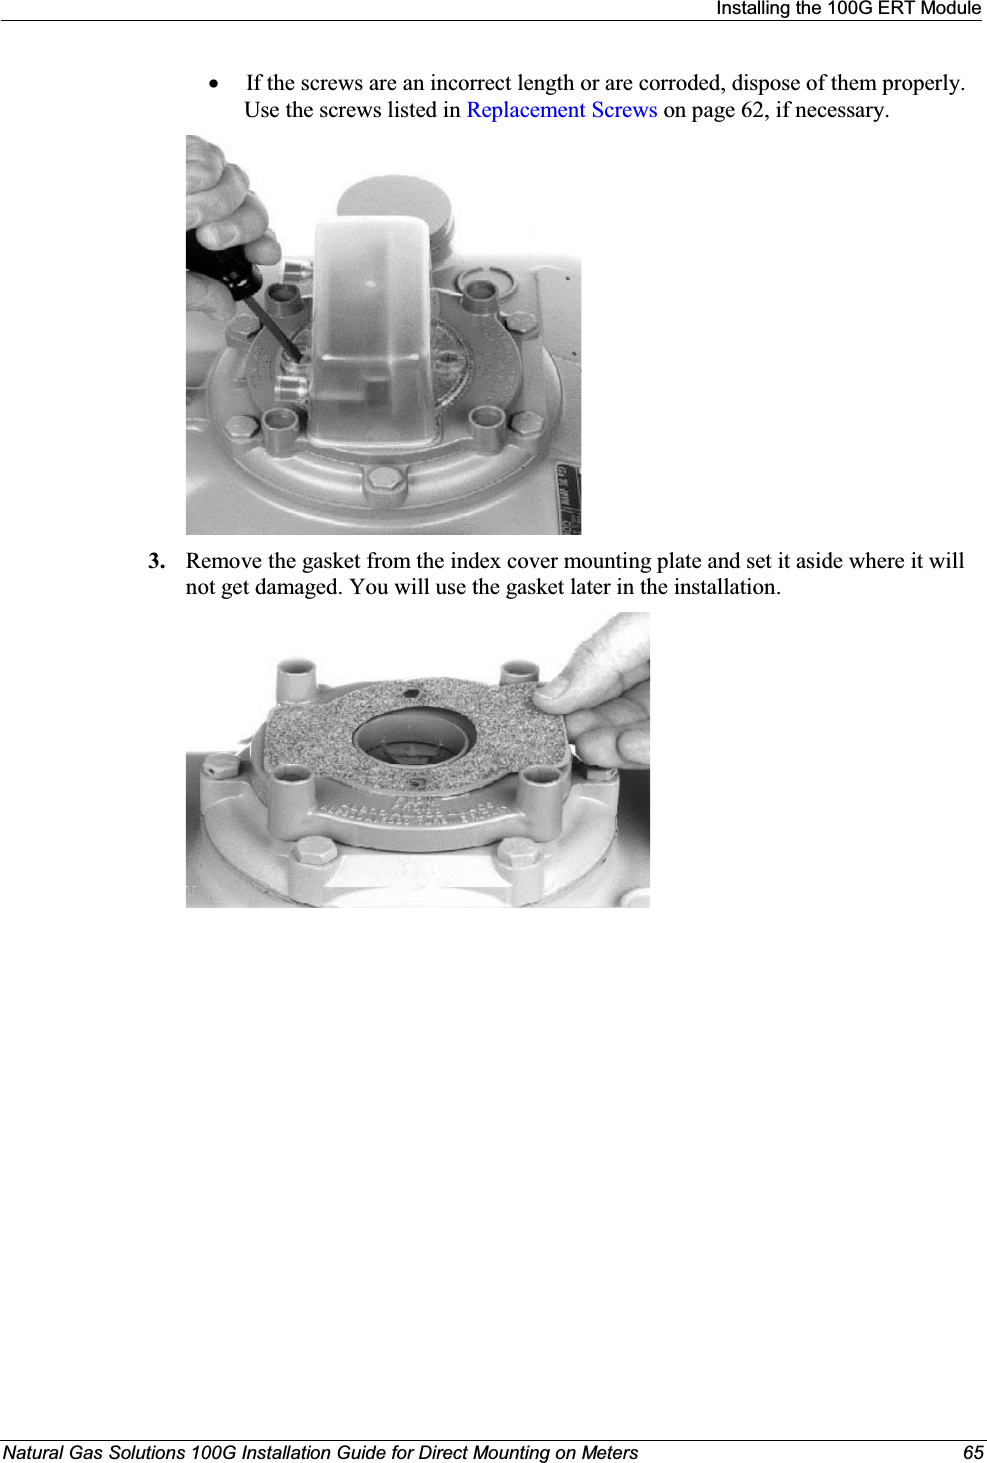 Installing the100G ERT ModuleNatural Gas Solutions 100G Installation Guide for Direct Mounting on Meters 65xIf the screws are an incorrect length or are corroded, dispose of them properly. Use the screws listed in Replacement Screws on page 62, if necessary.3. Remove the gasket from the index cover mounting plate and set it aside where it will not get damaged. You will use the gasket later in the installation.